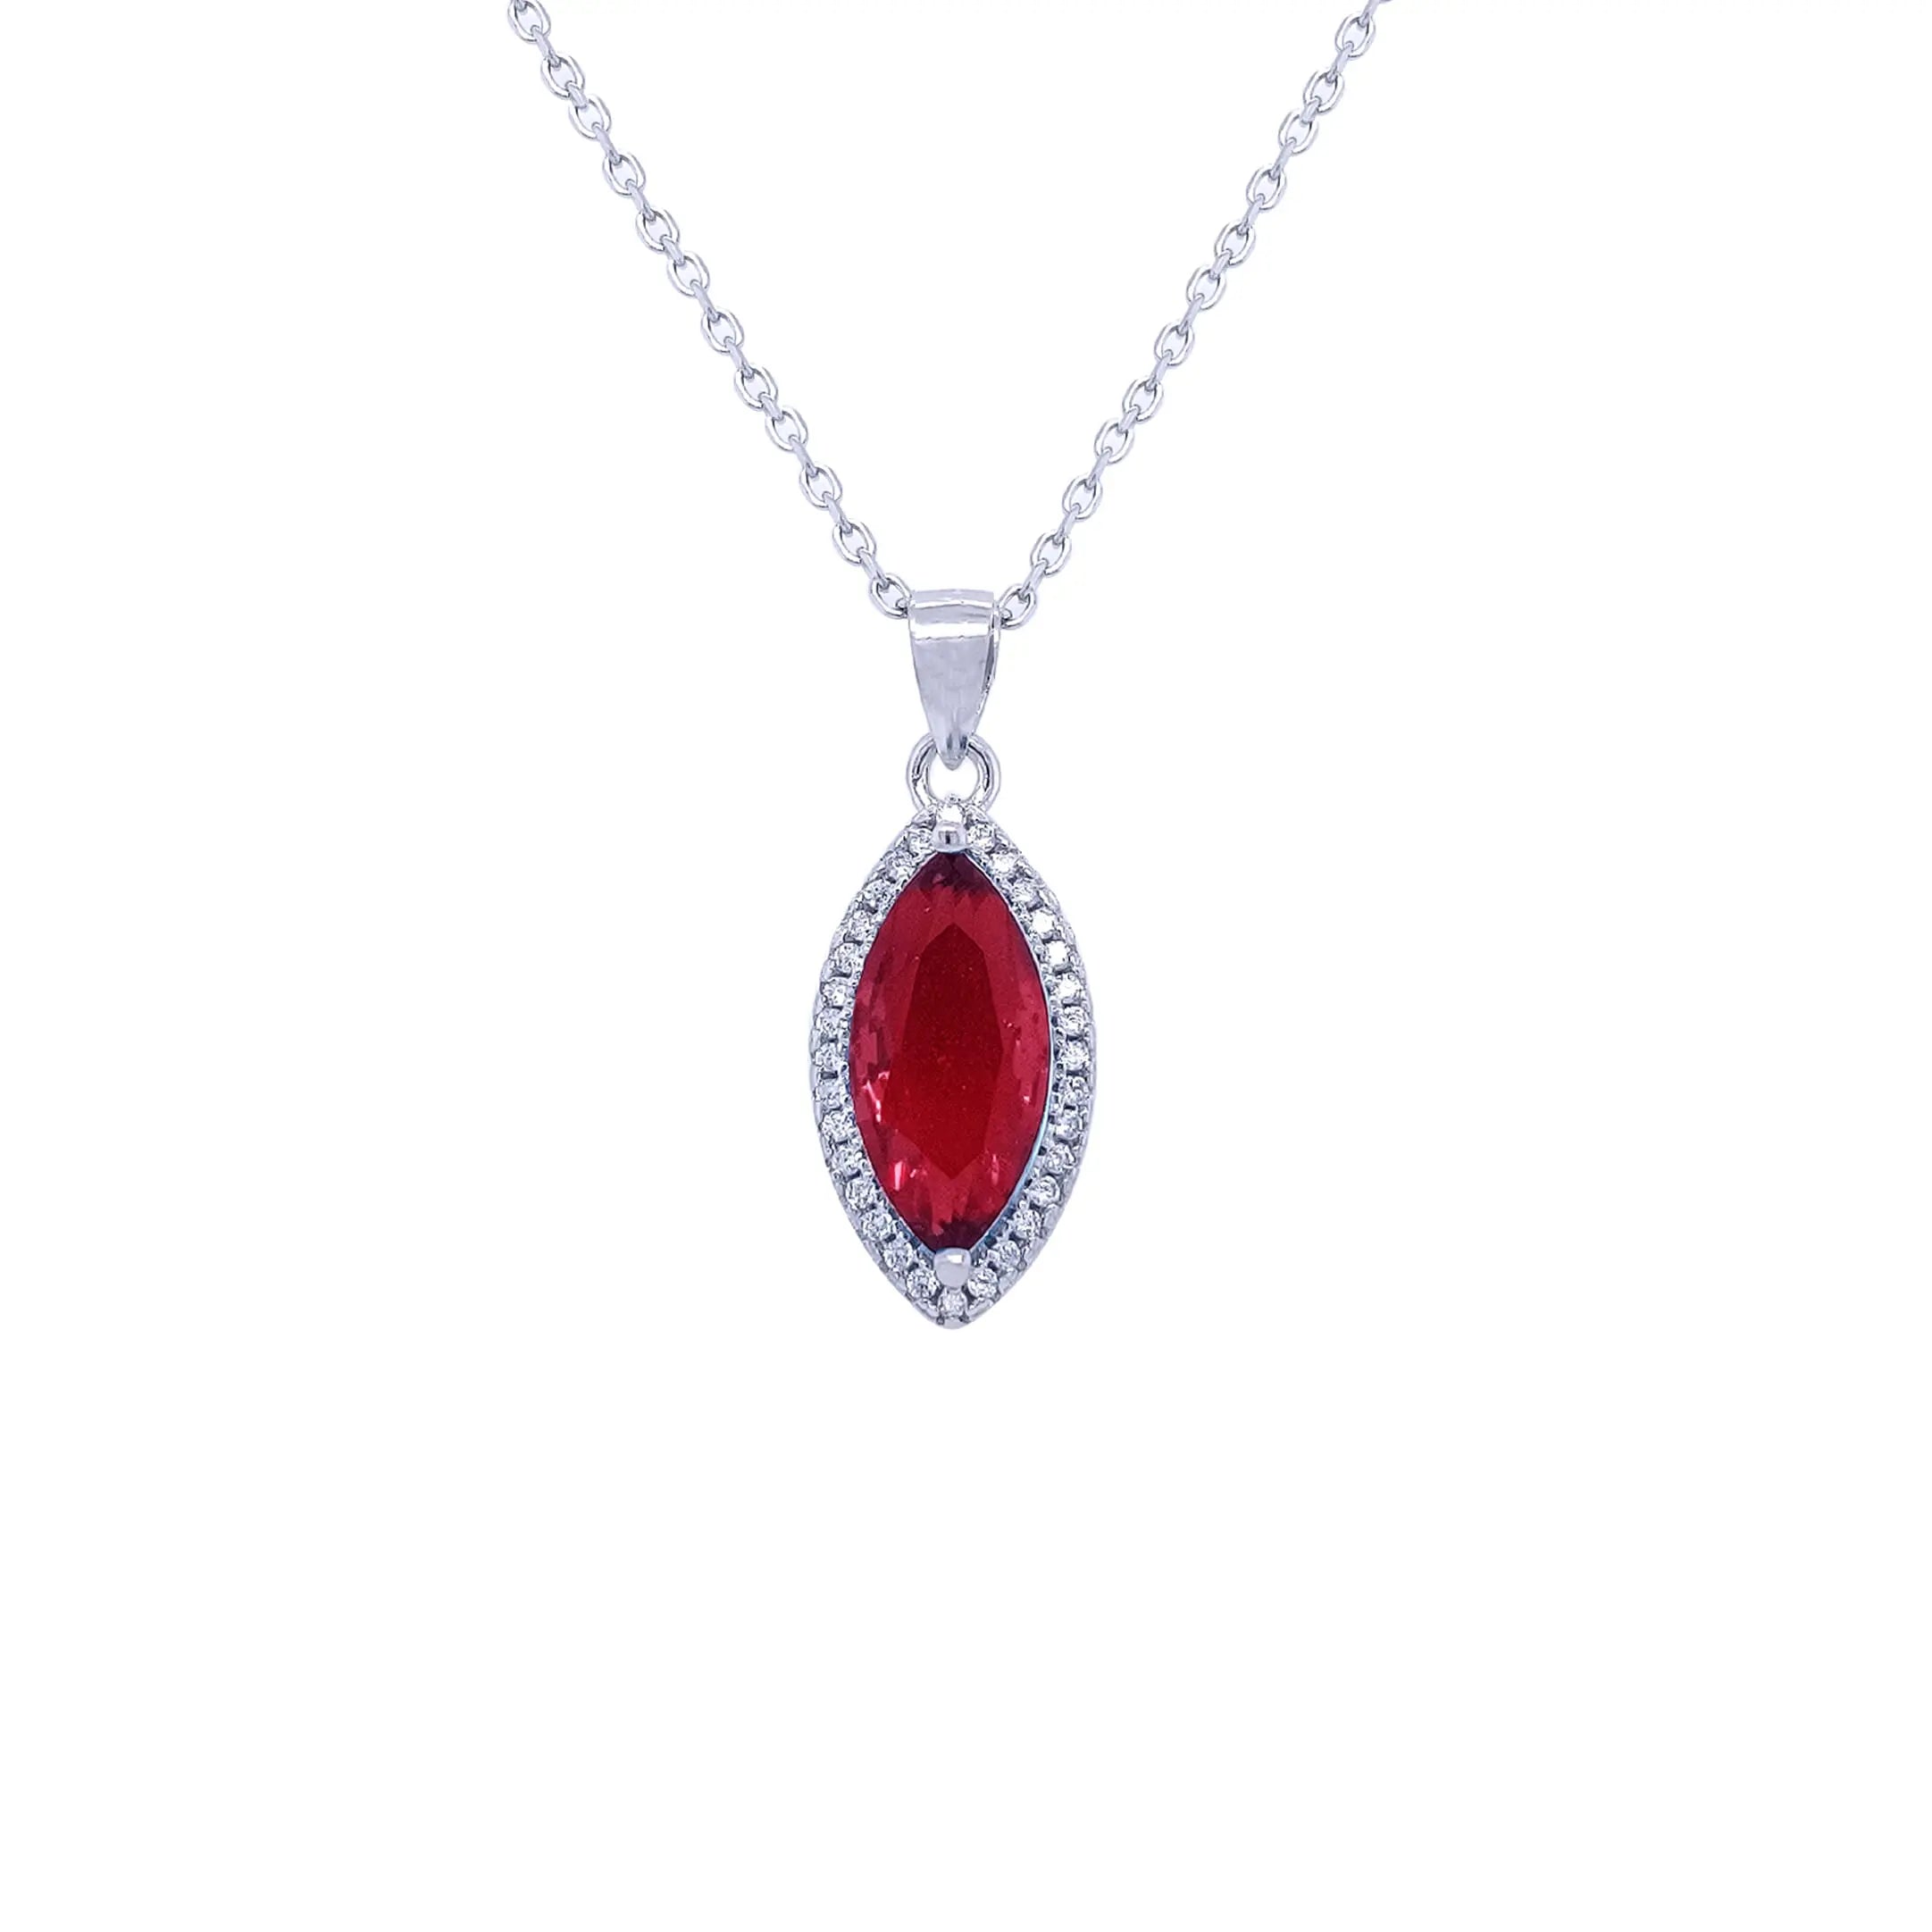 Silver Necklace Sterling 925 With Red Zircon Stones-Necklaces-Asfour Crystal